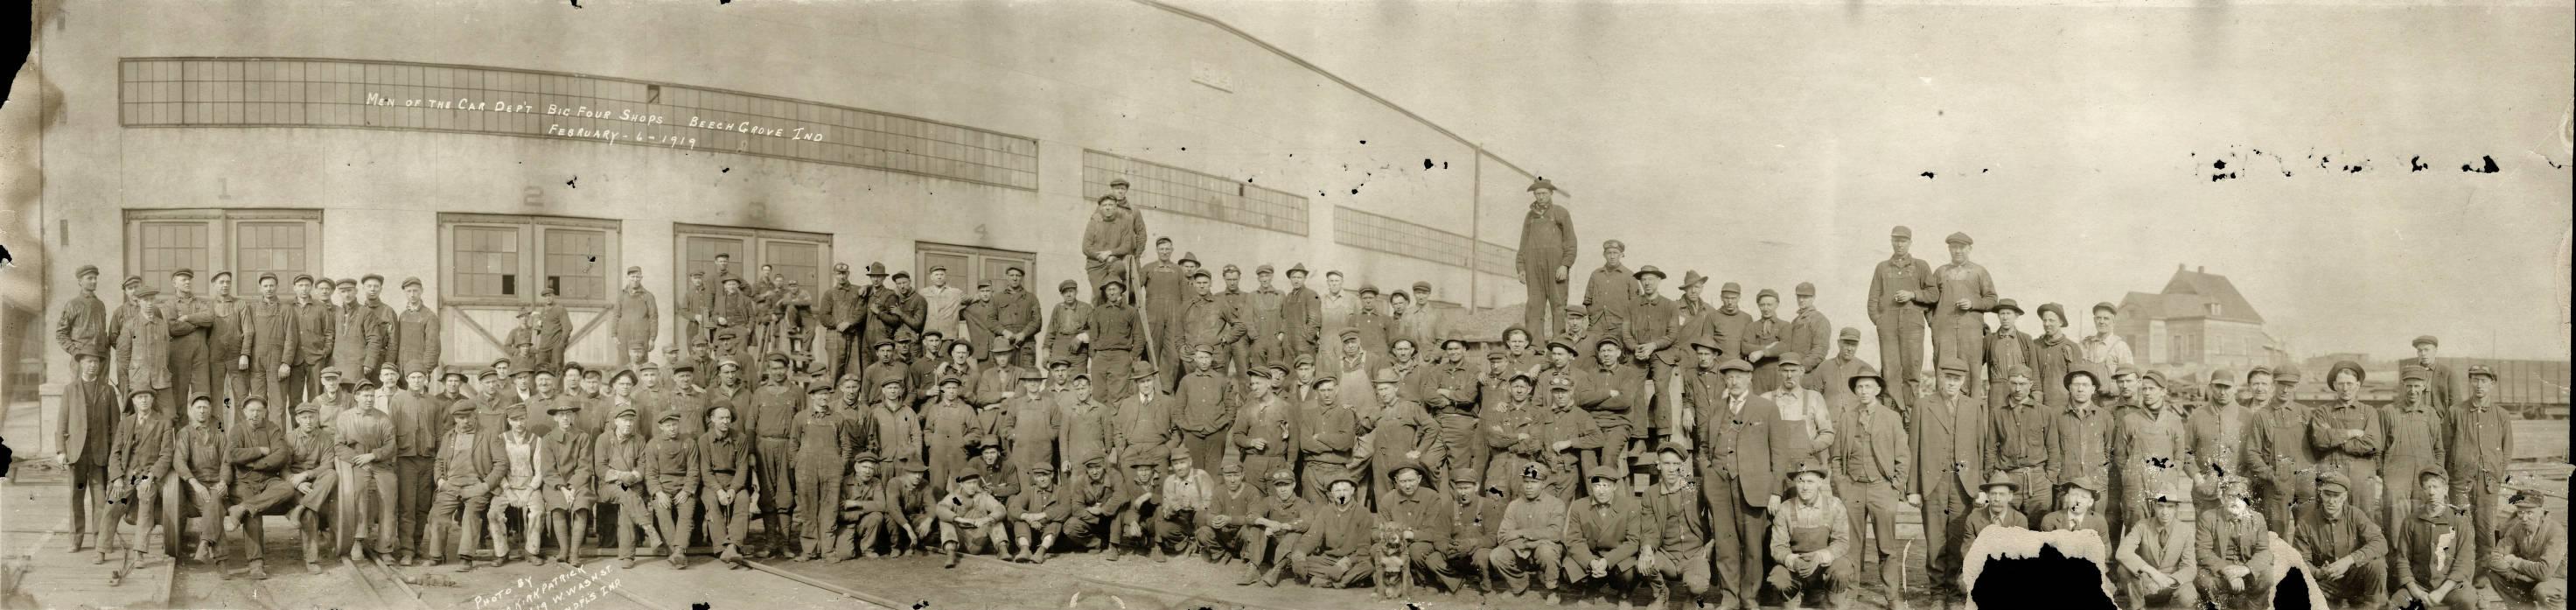 A large group of workers are gathered outside an industrial building. 